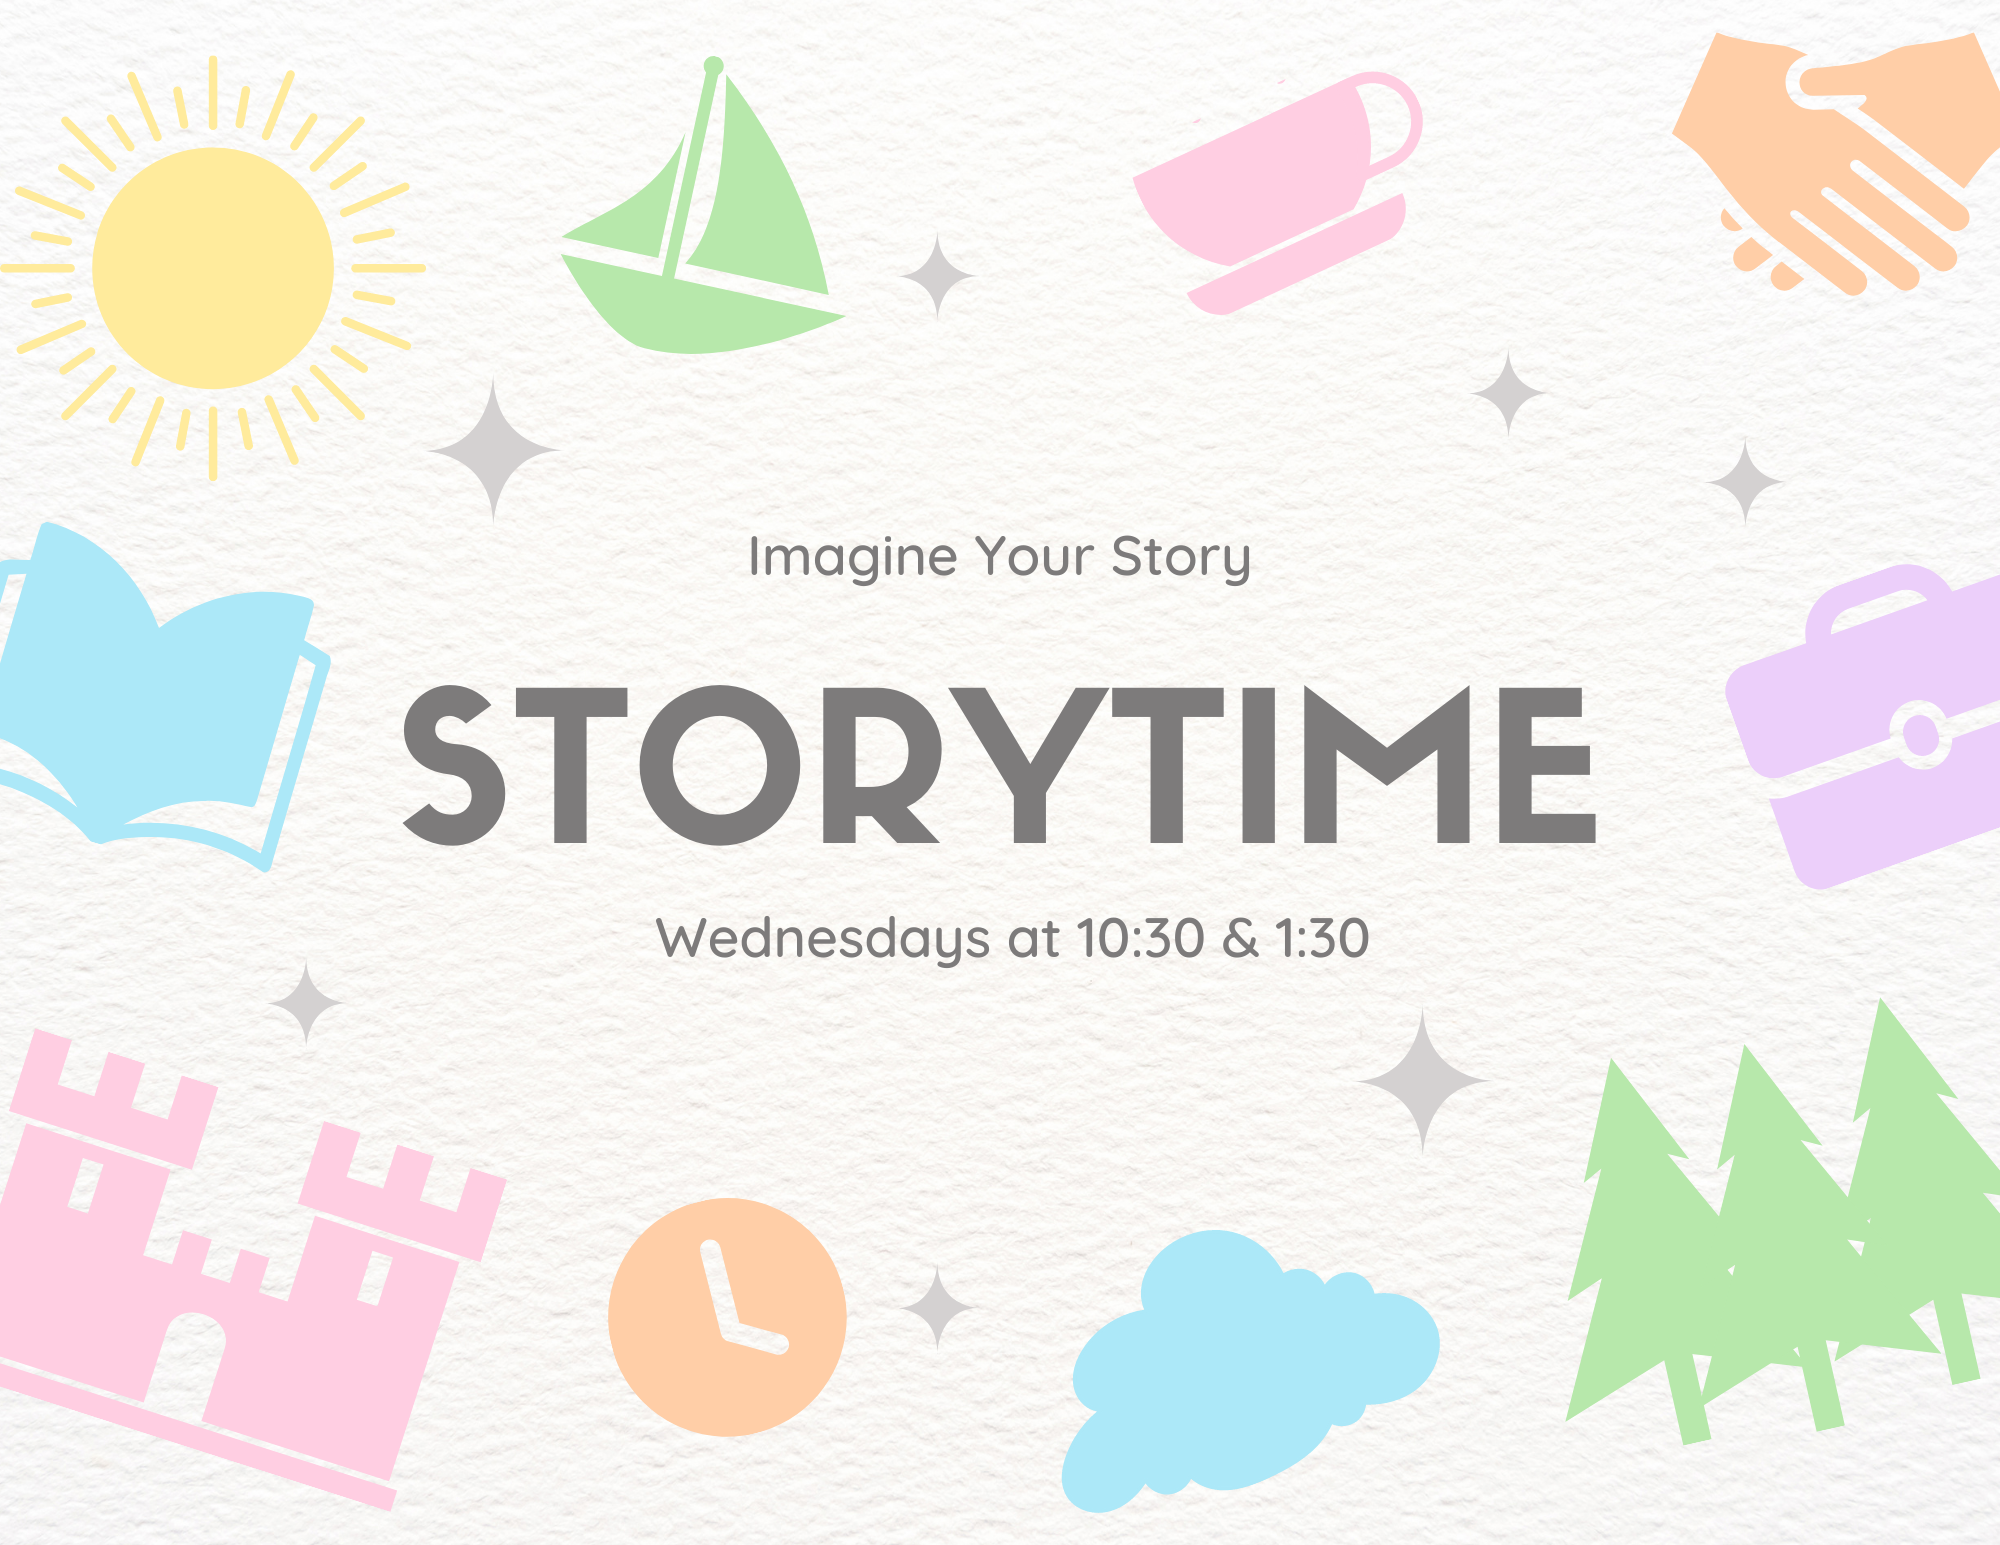 "Storytime" surrounded by miscellaneous fairytale images 